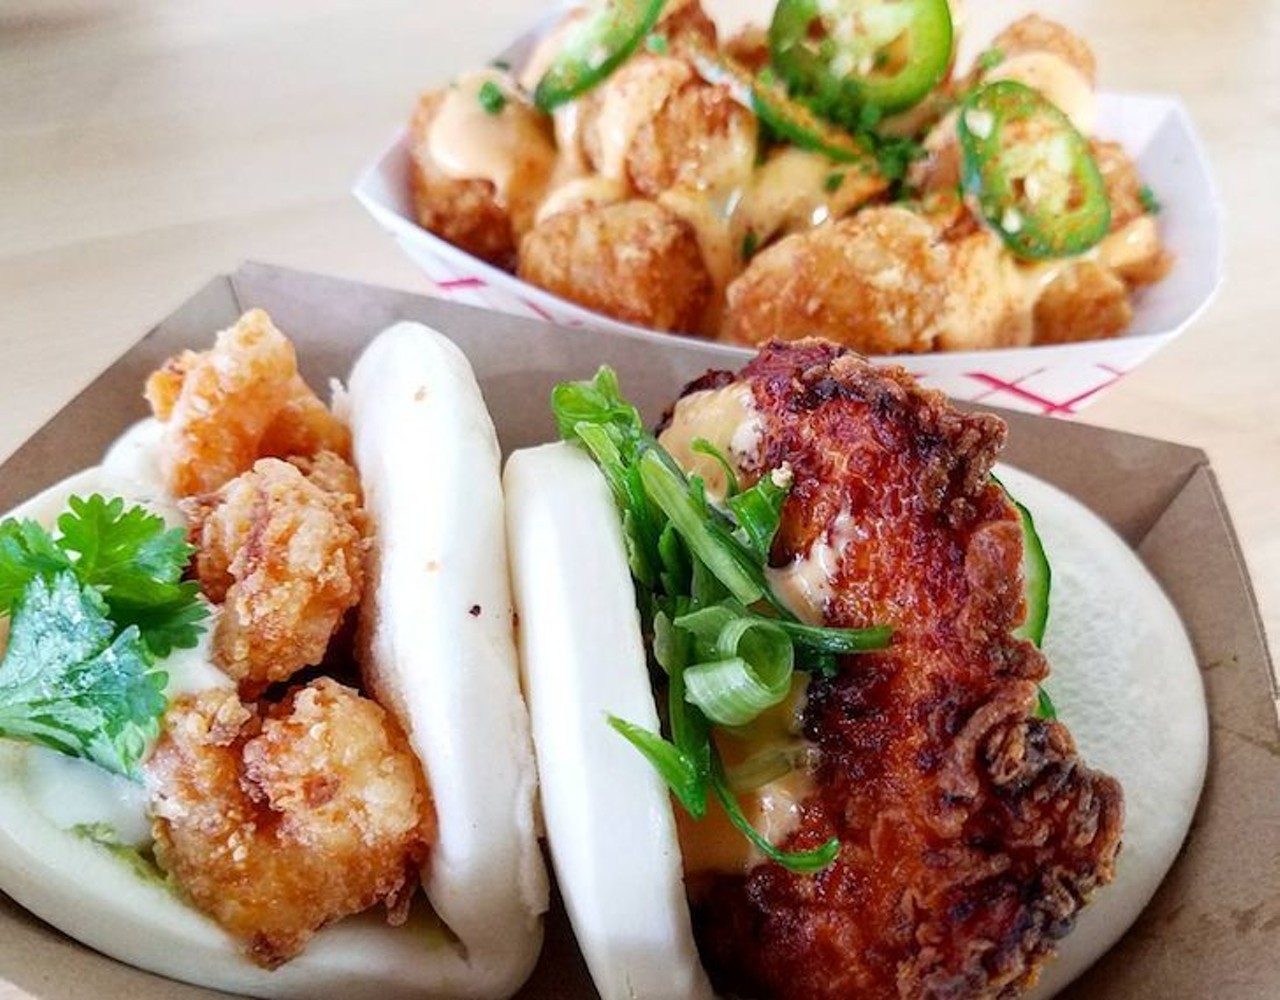 Must-try: Kickin' Chicken and Firecracker Shrimp baos with Fire Tots
Photo via _lex_in_the_city/Instagram